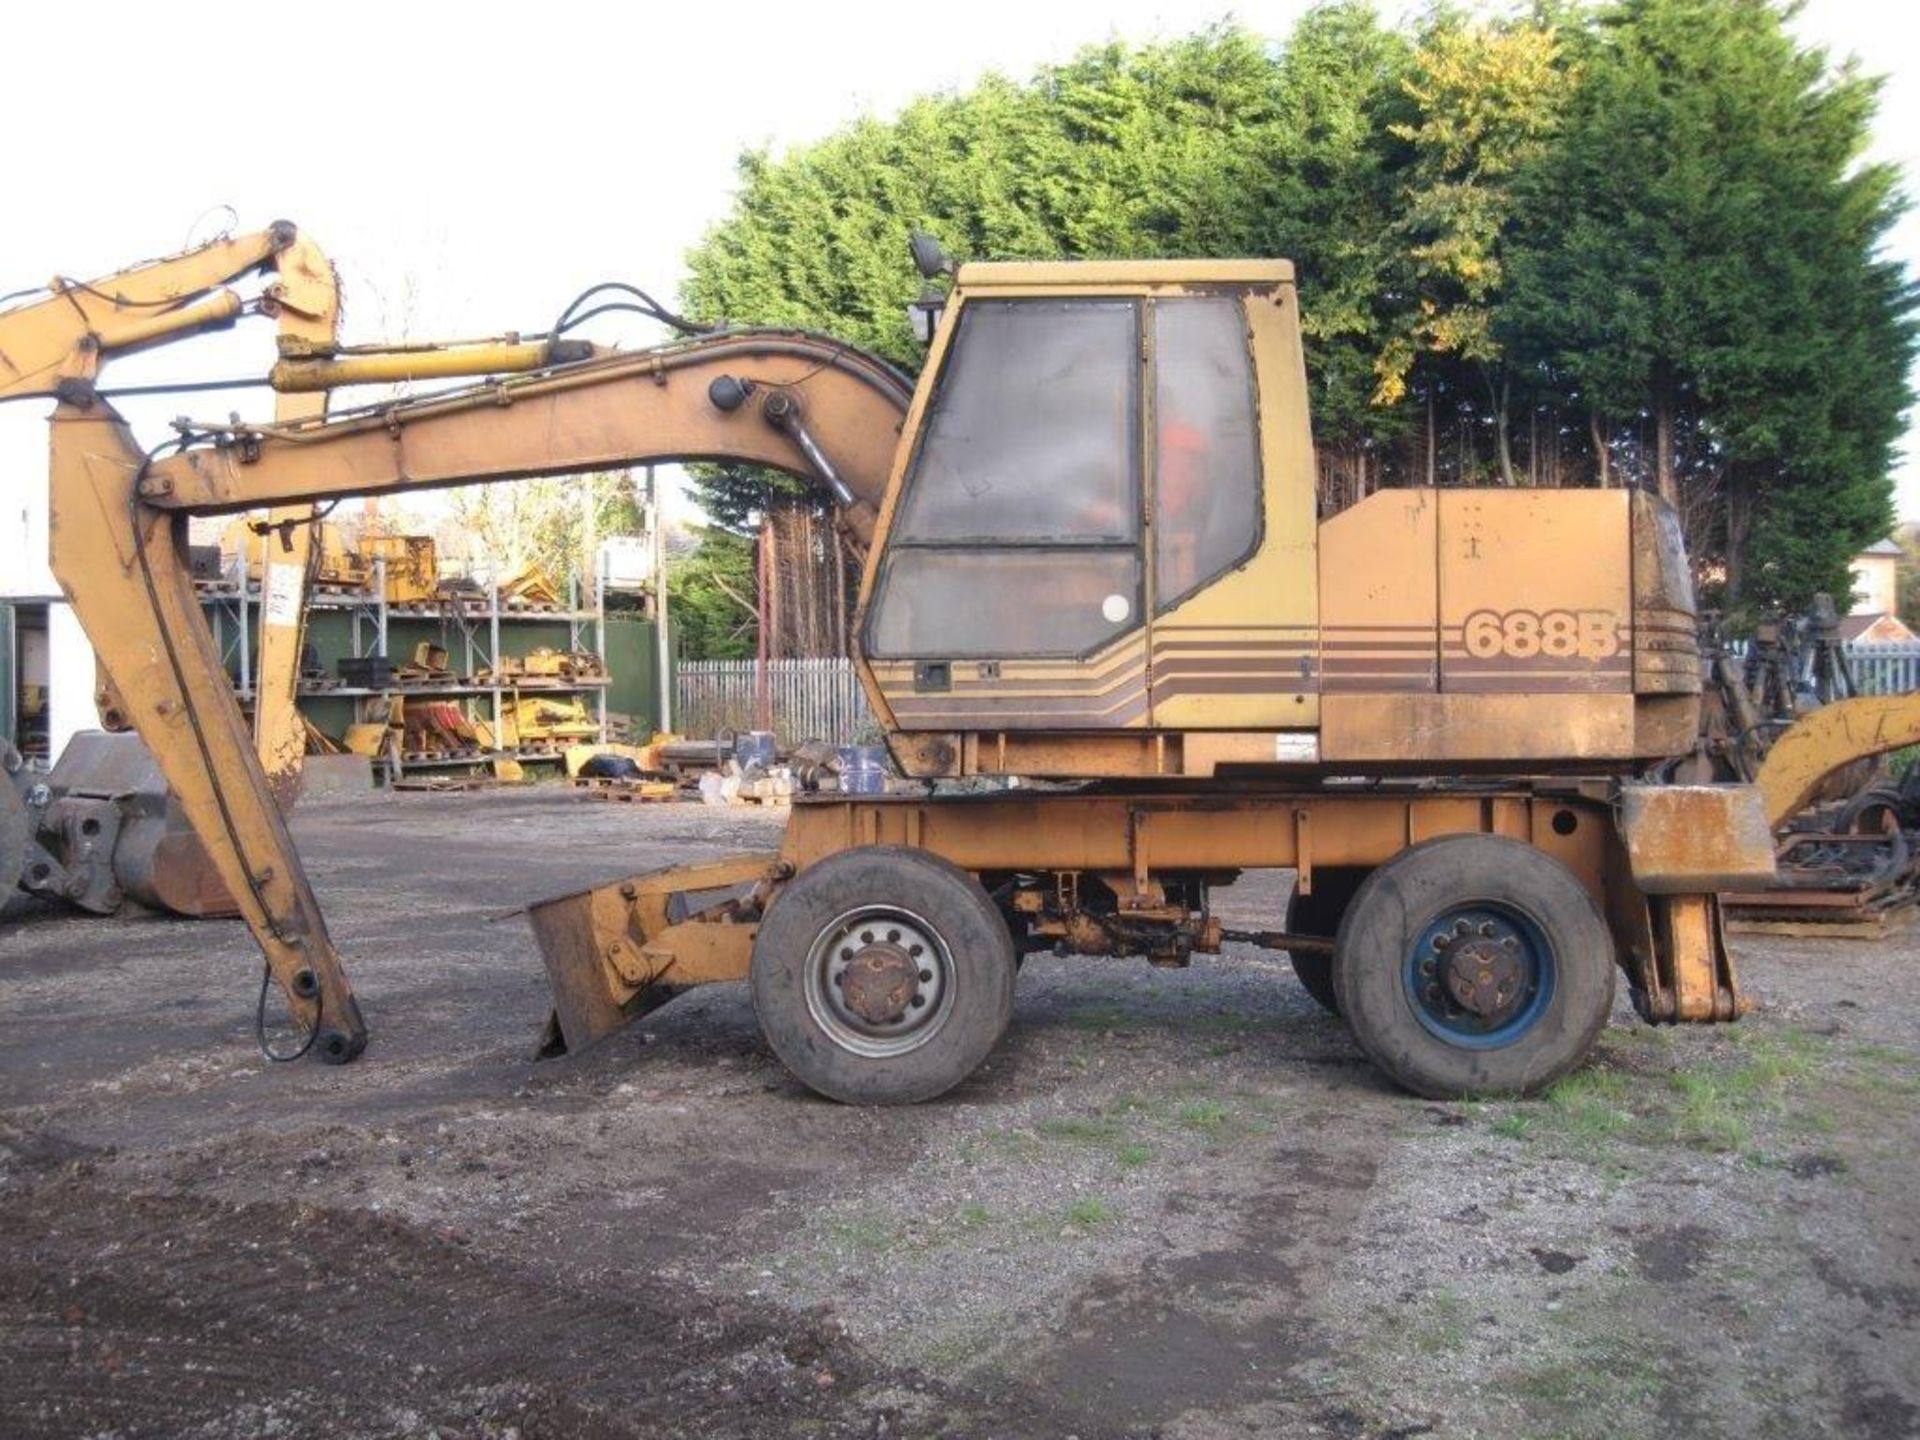 Case 688B Excavator on Wheels Direct from work - Image 2 of 2